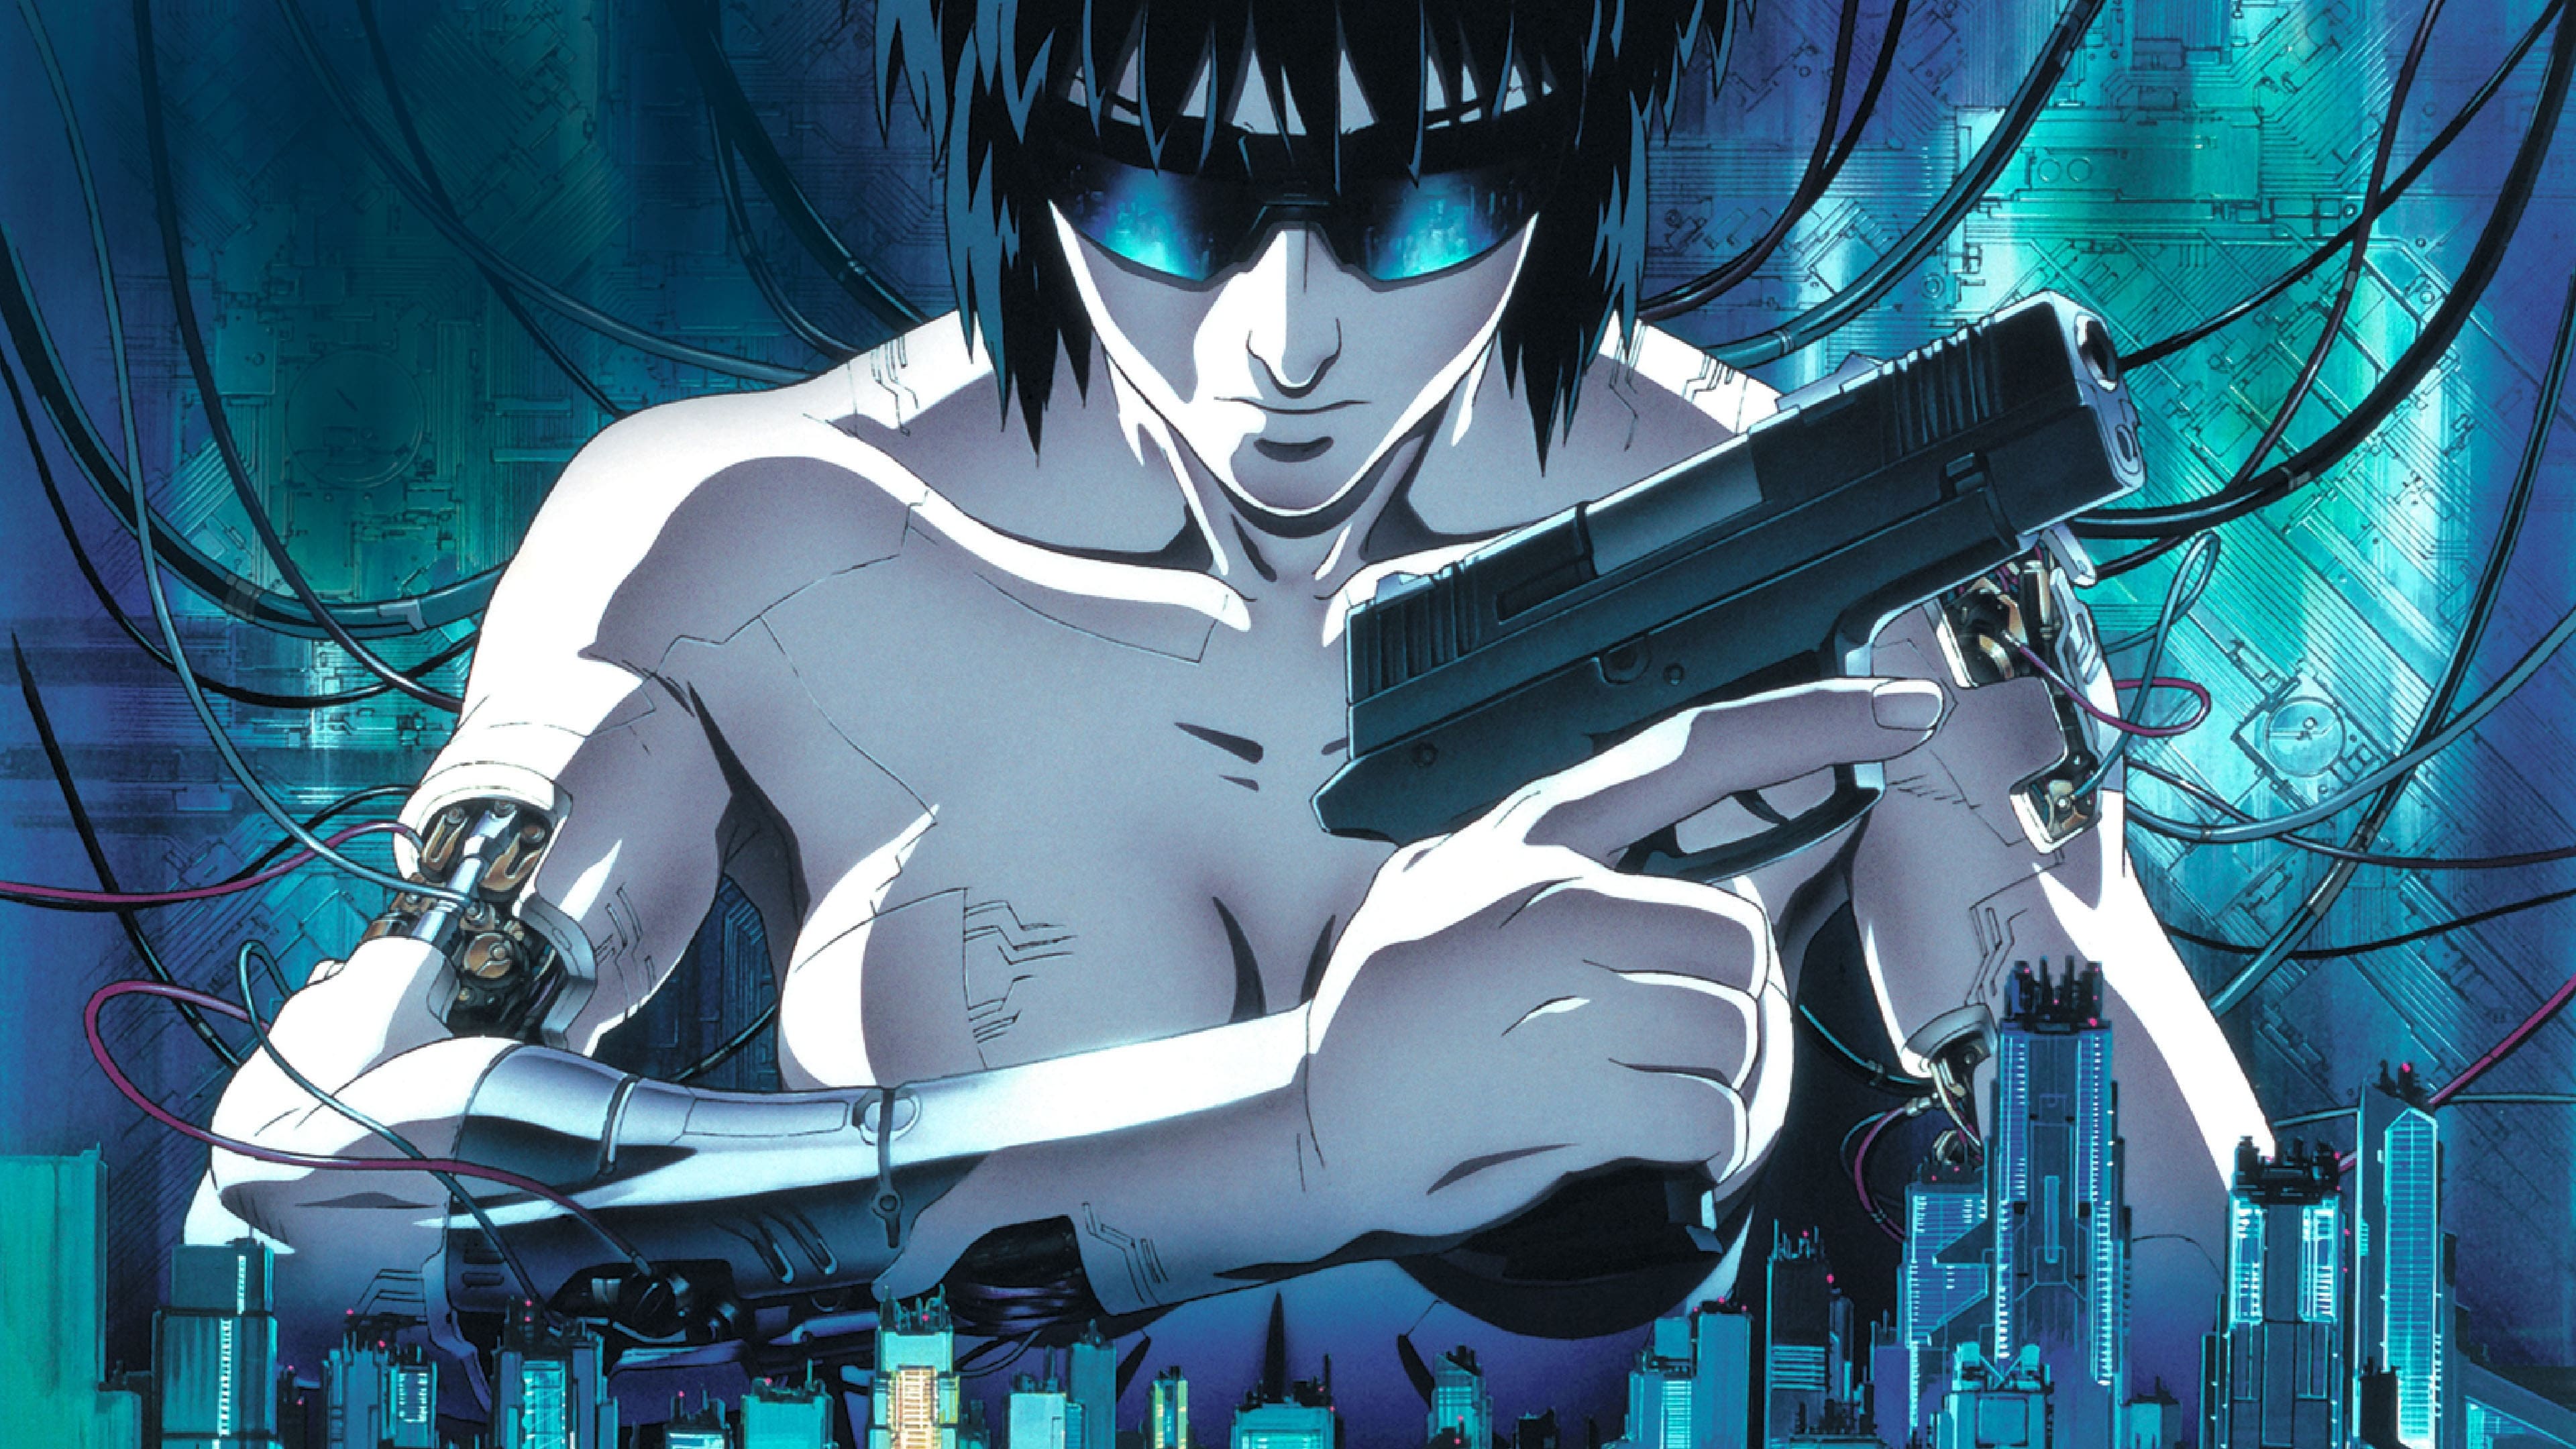 Poster Phim Vỏ Bọc Ma (Ghost in the Shell)